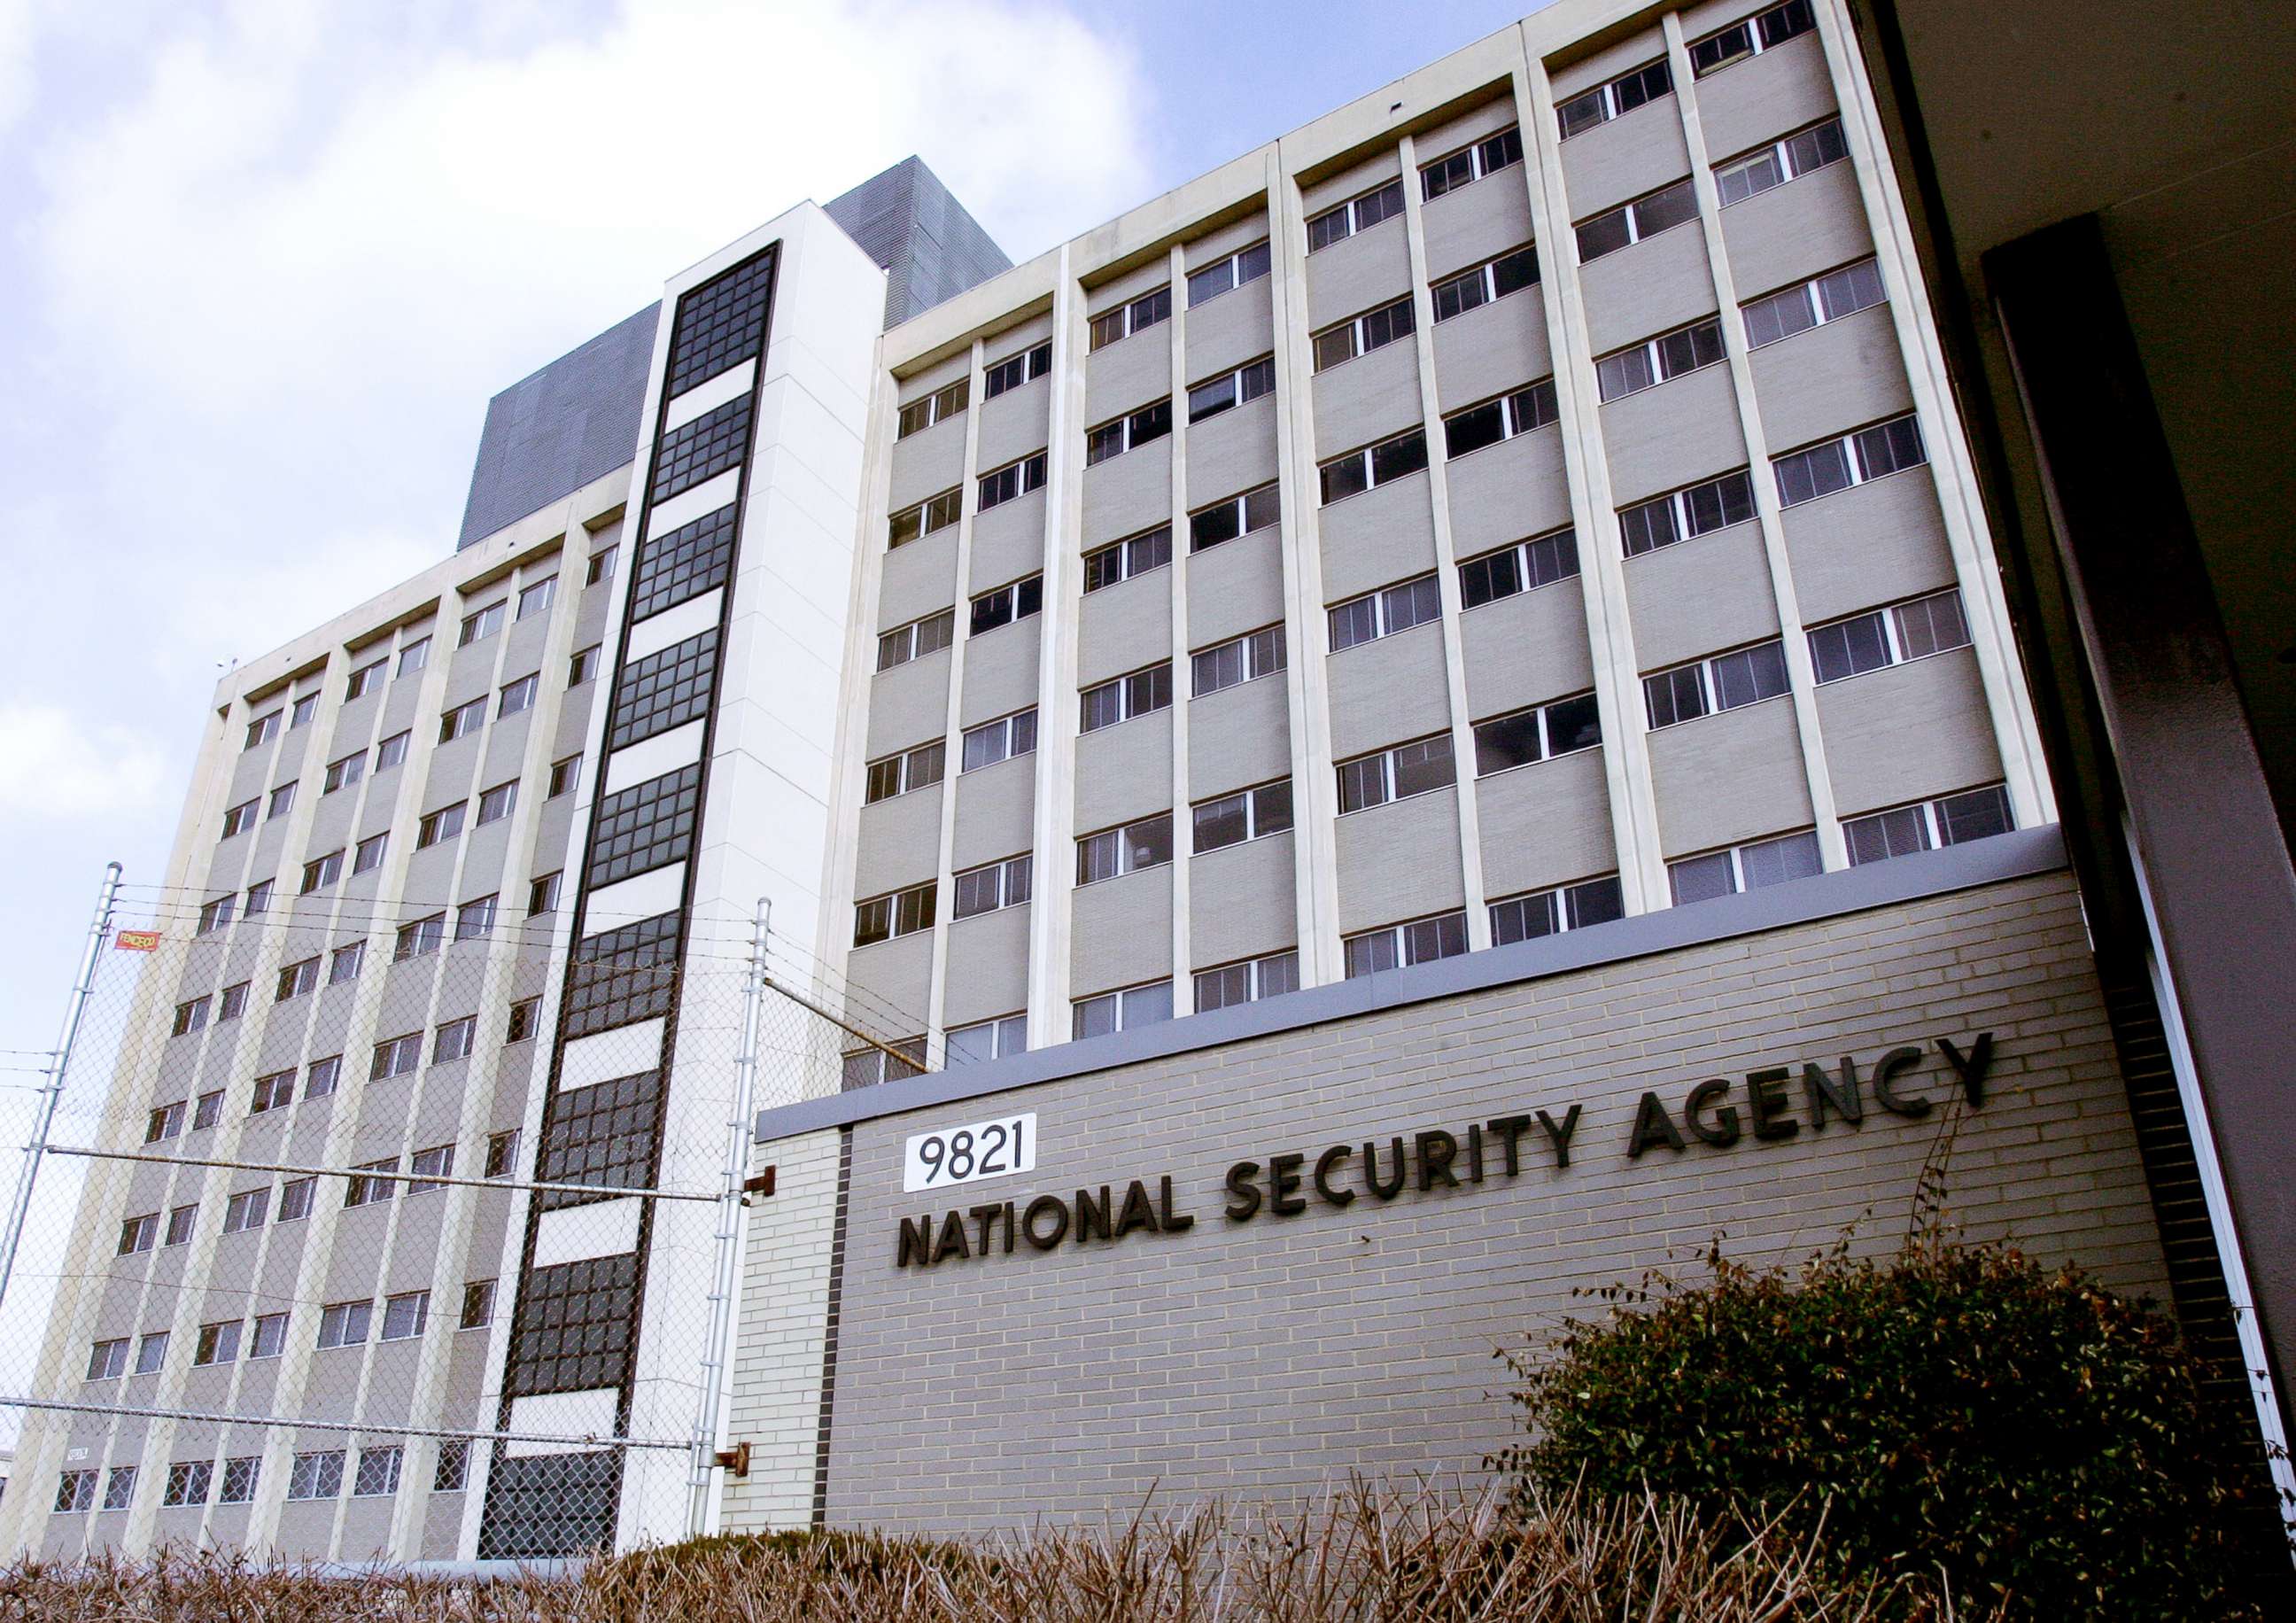 PHOTO: An external view of the National Security Agency building in the Washington suburb of Fort Meade, Md., is captured on Jan. 25, 2006. 
